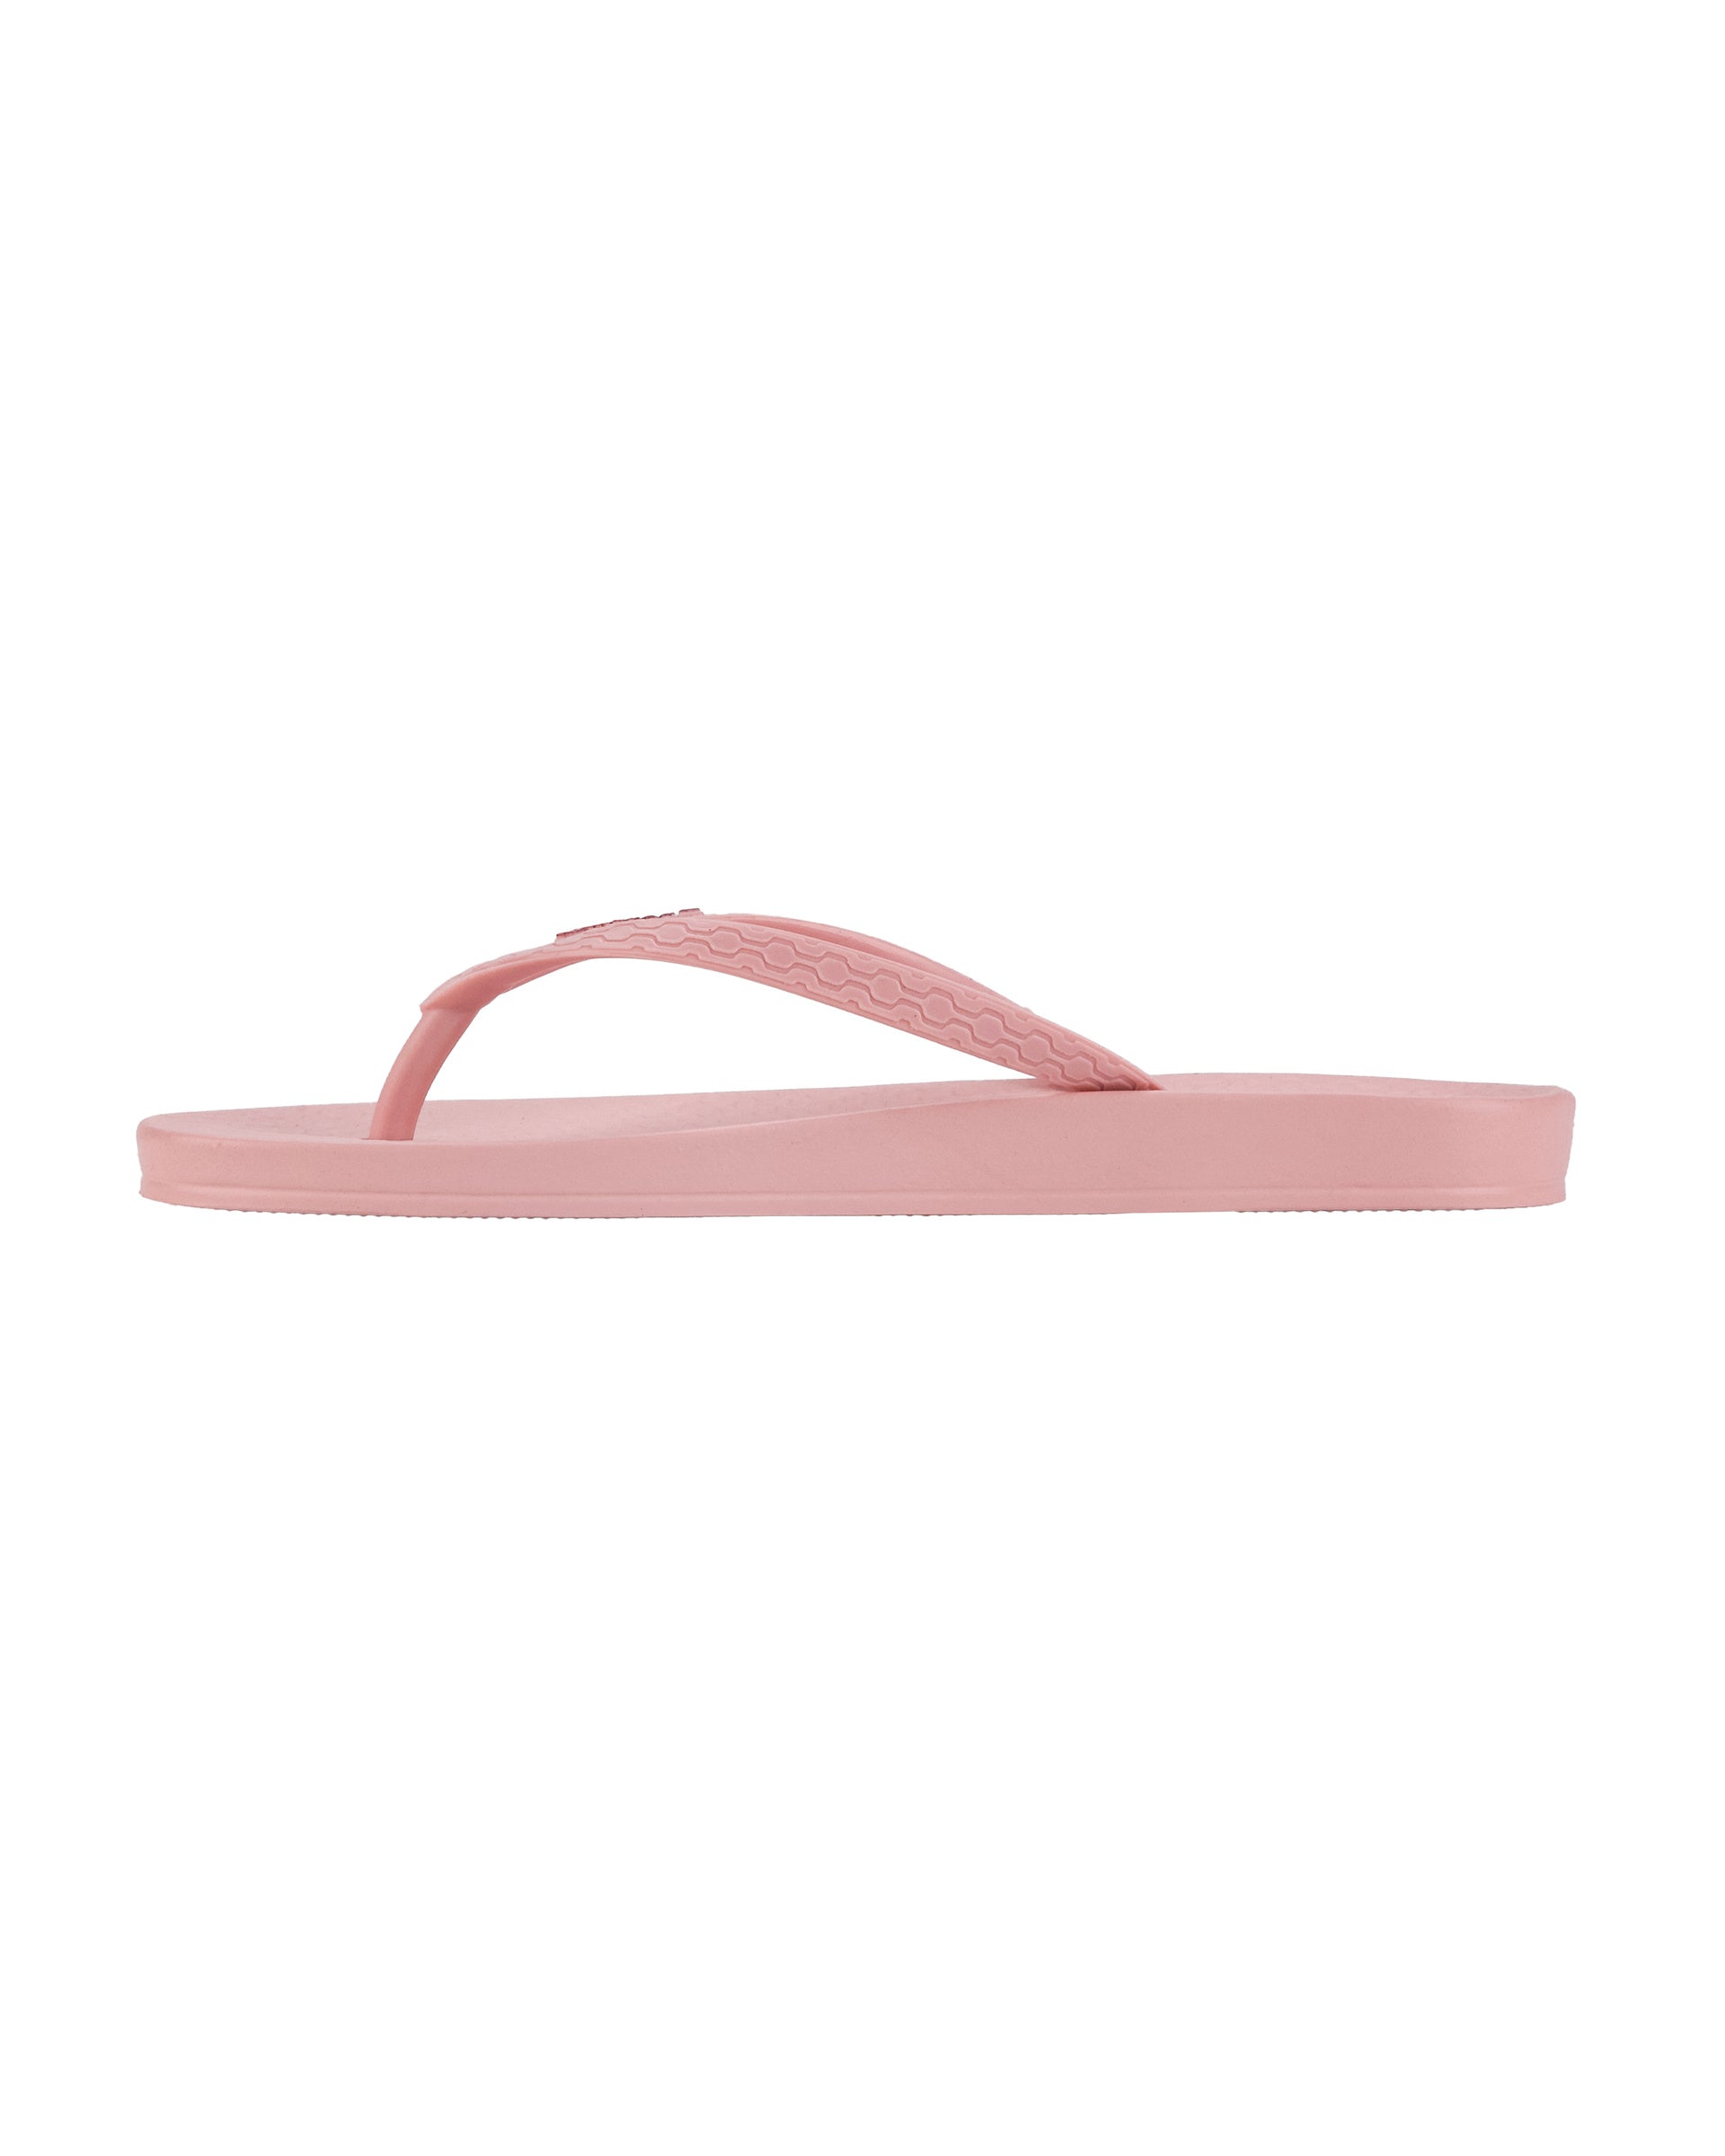 Inner side view of a pink Ipanema Ana Colors women's flip flop.